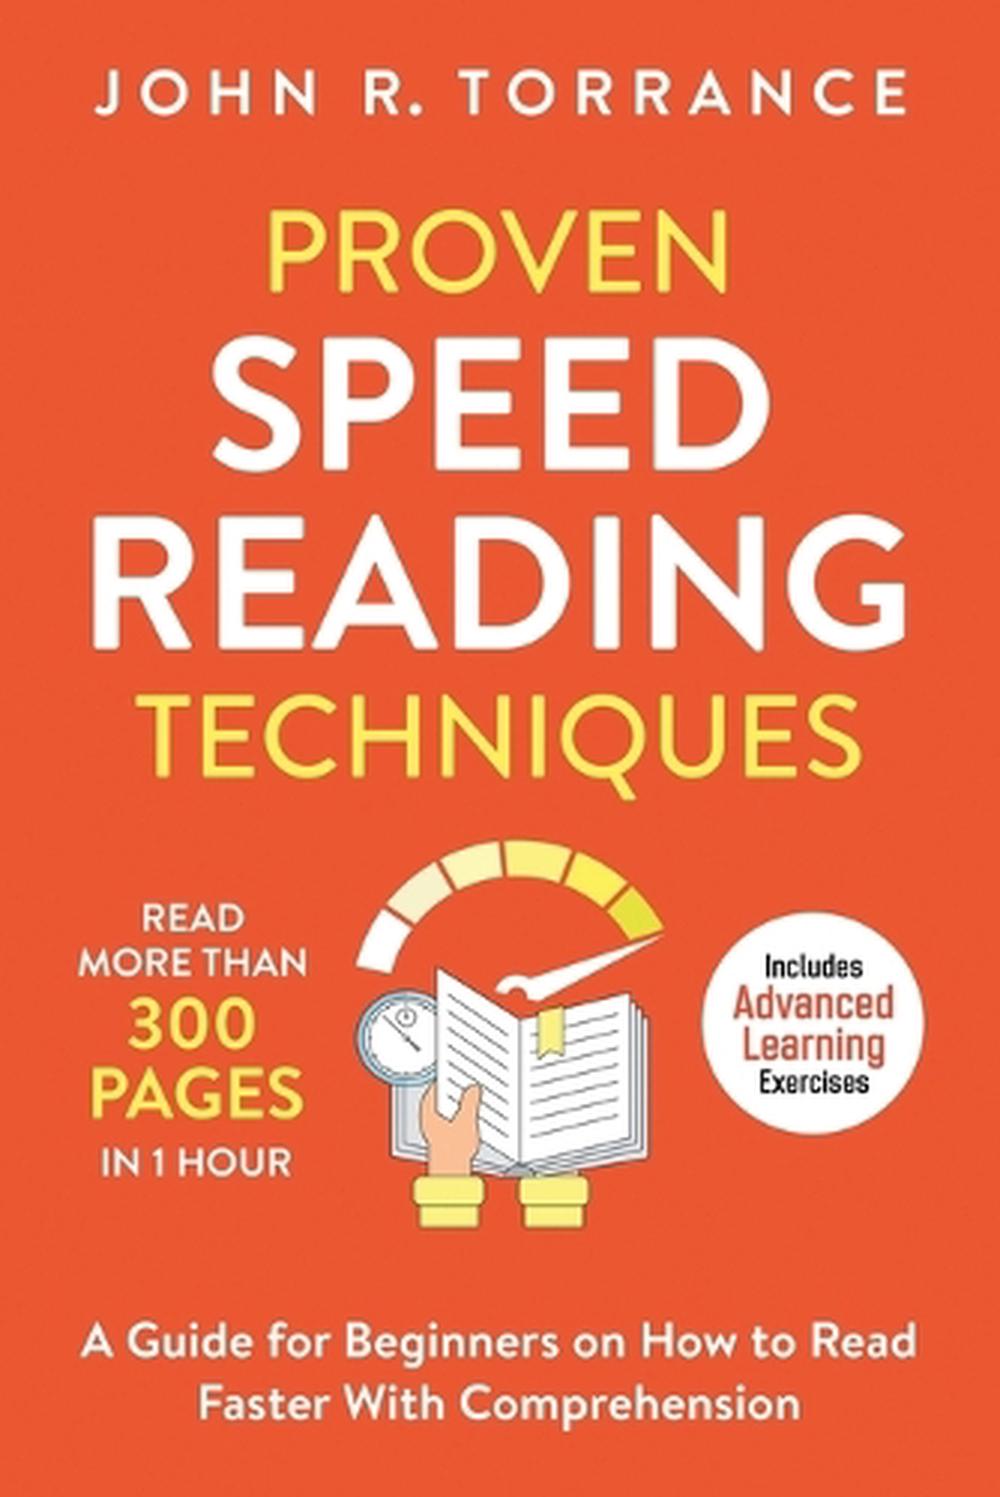 what is speed reading techniques